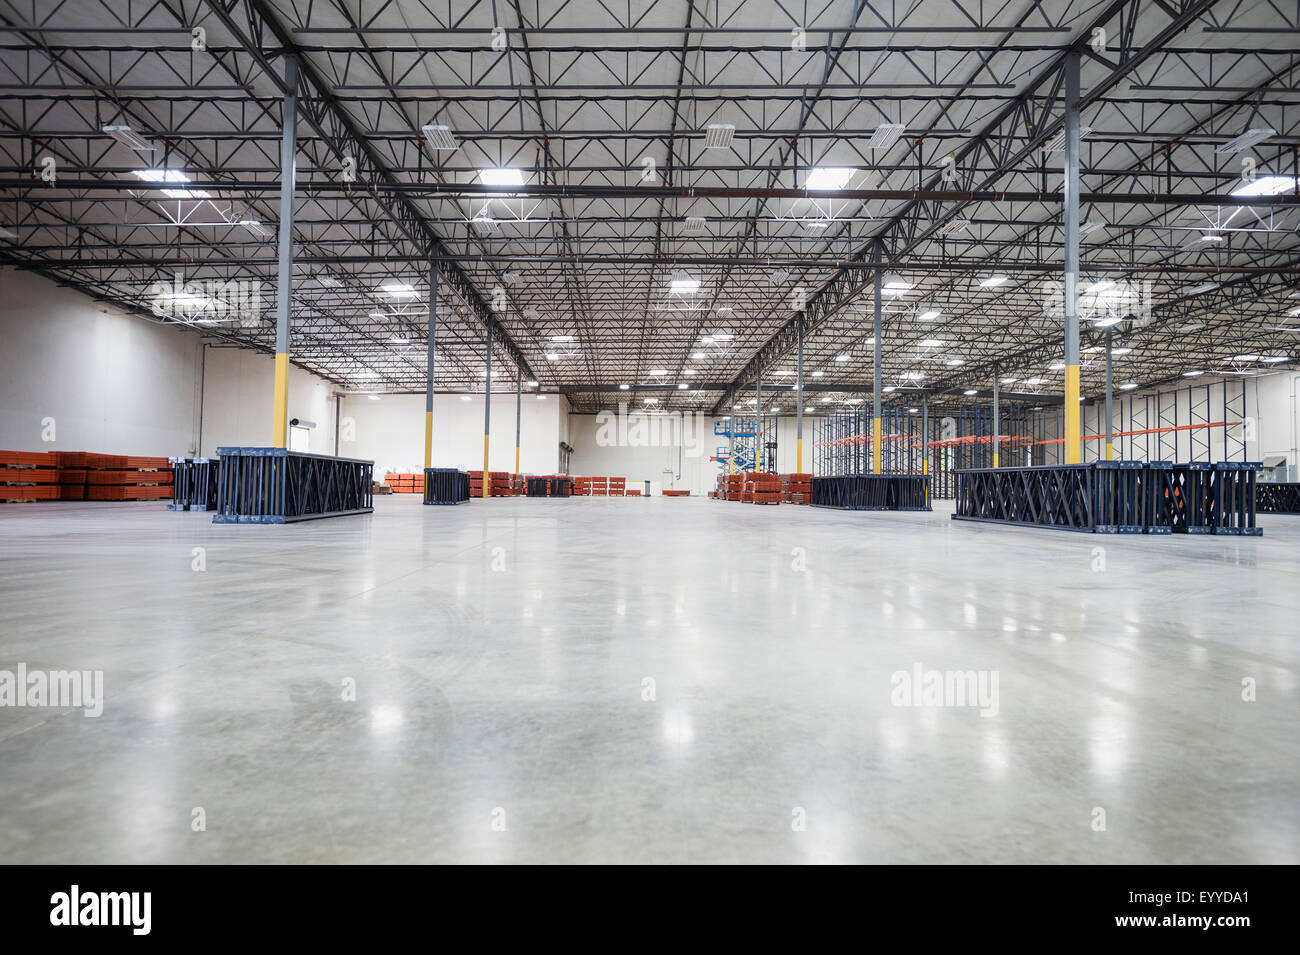 Infrastructure and lighting in empty warehouse Stock Photo